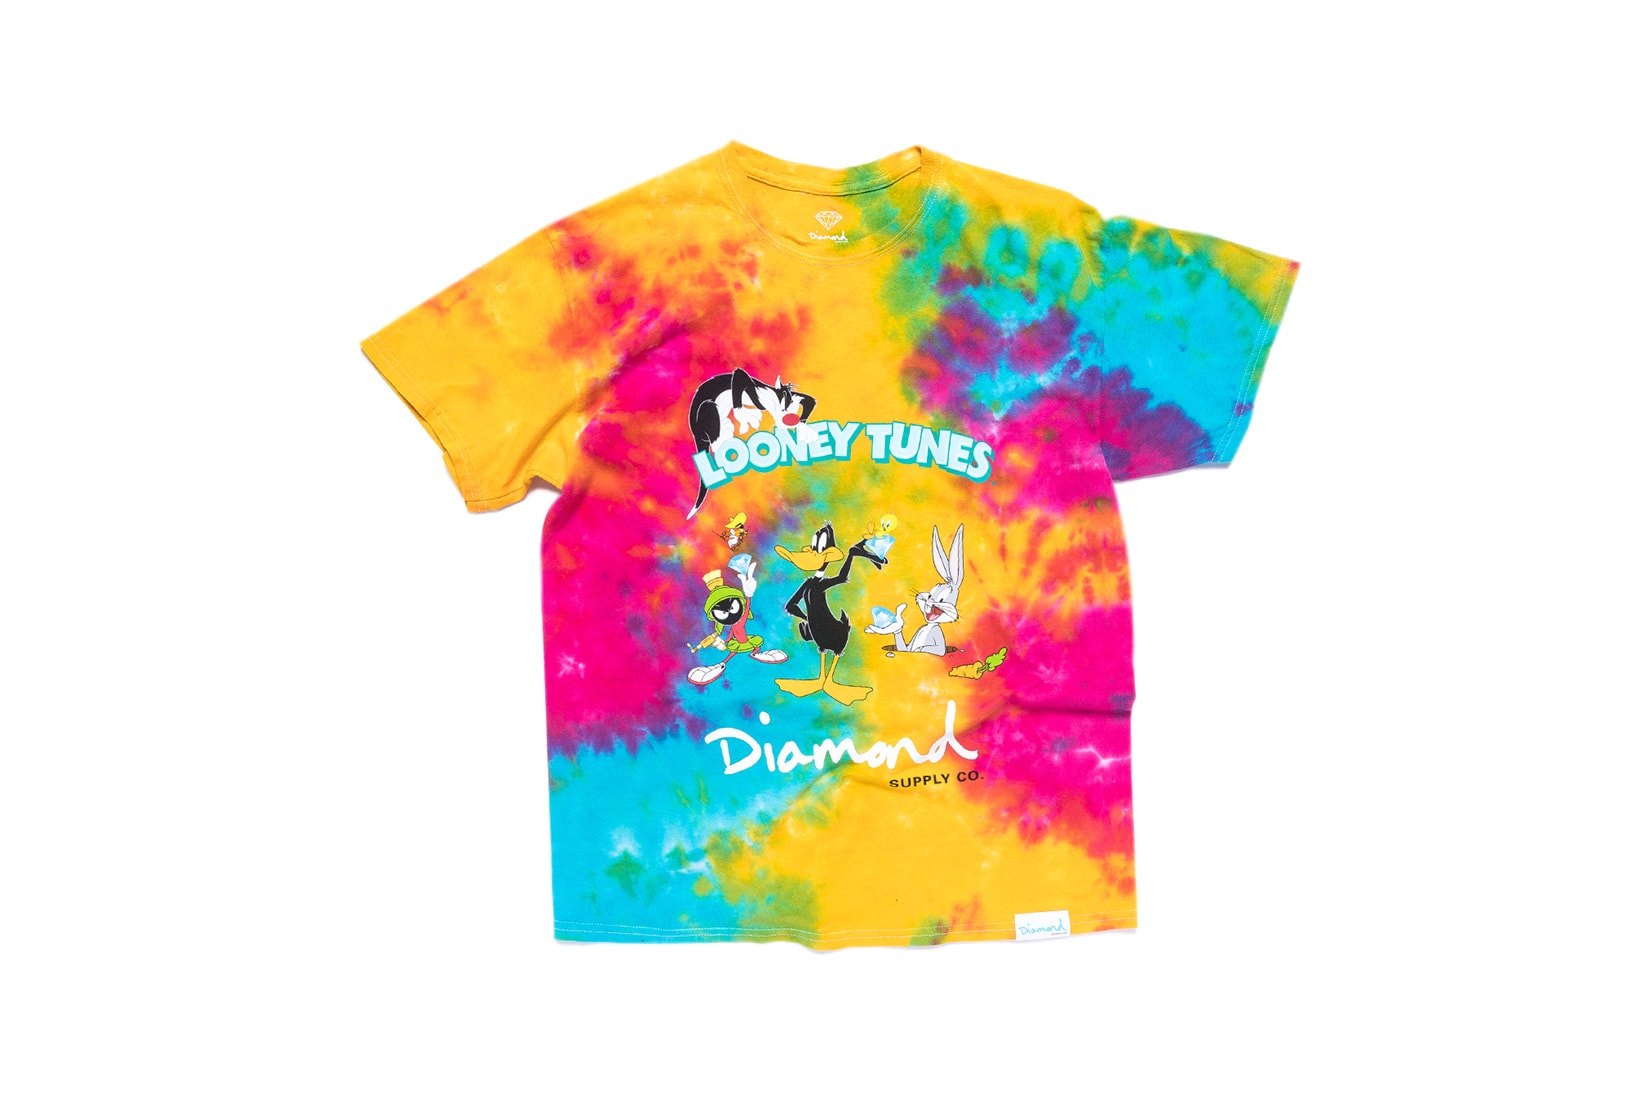 Looney Tunes x Diamond Supply Co. Collection Sylvester Bugs Bunny Daffy Duck Marvin the Martian T-Shirt Tie Dye Rainbow